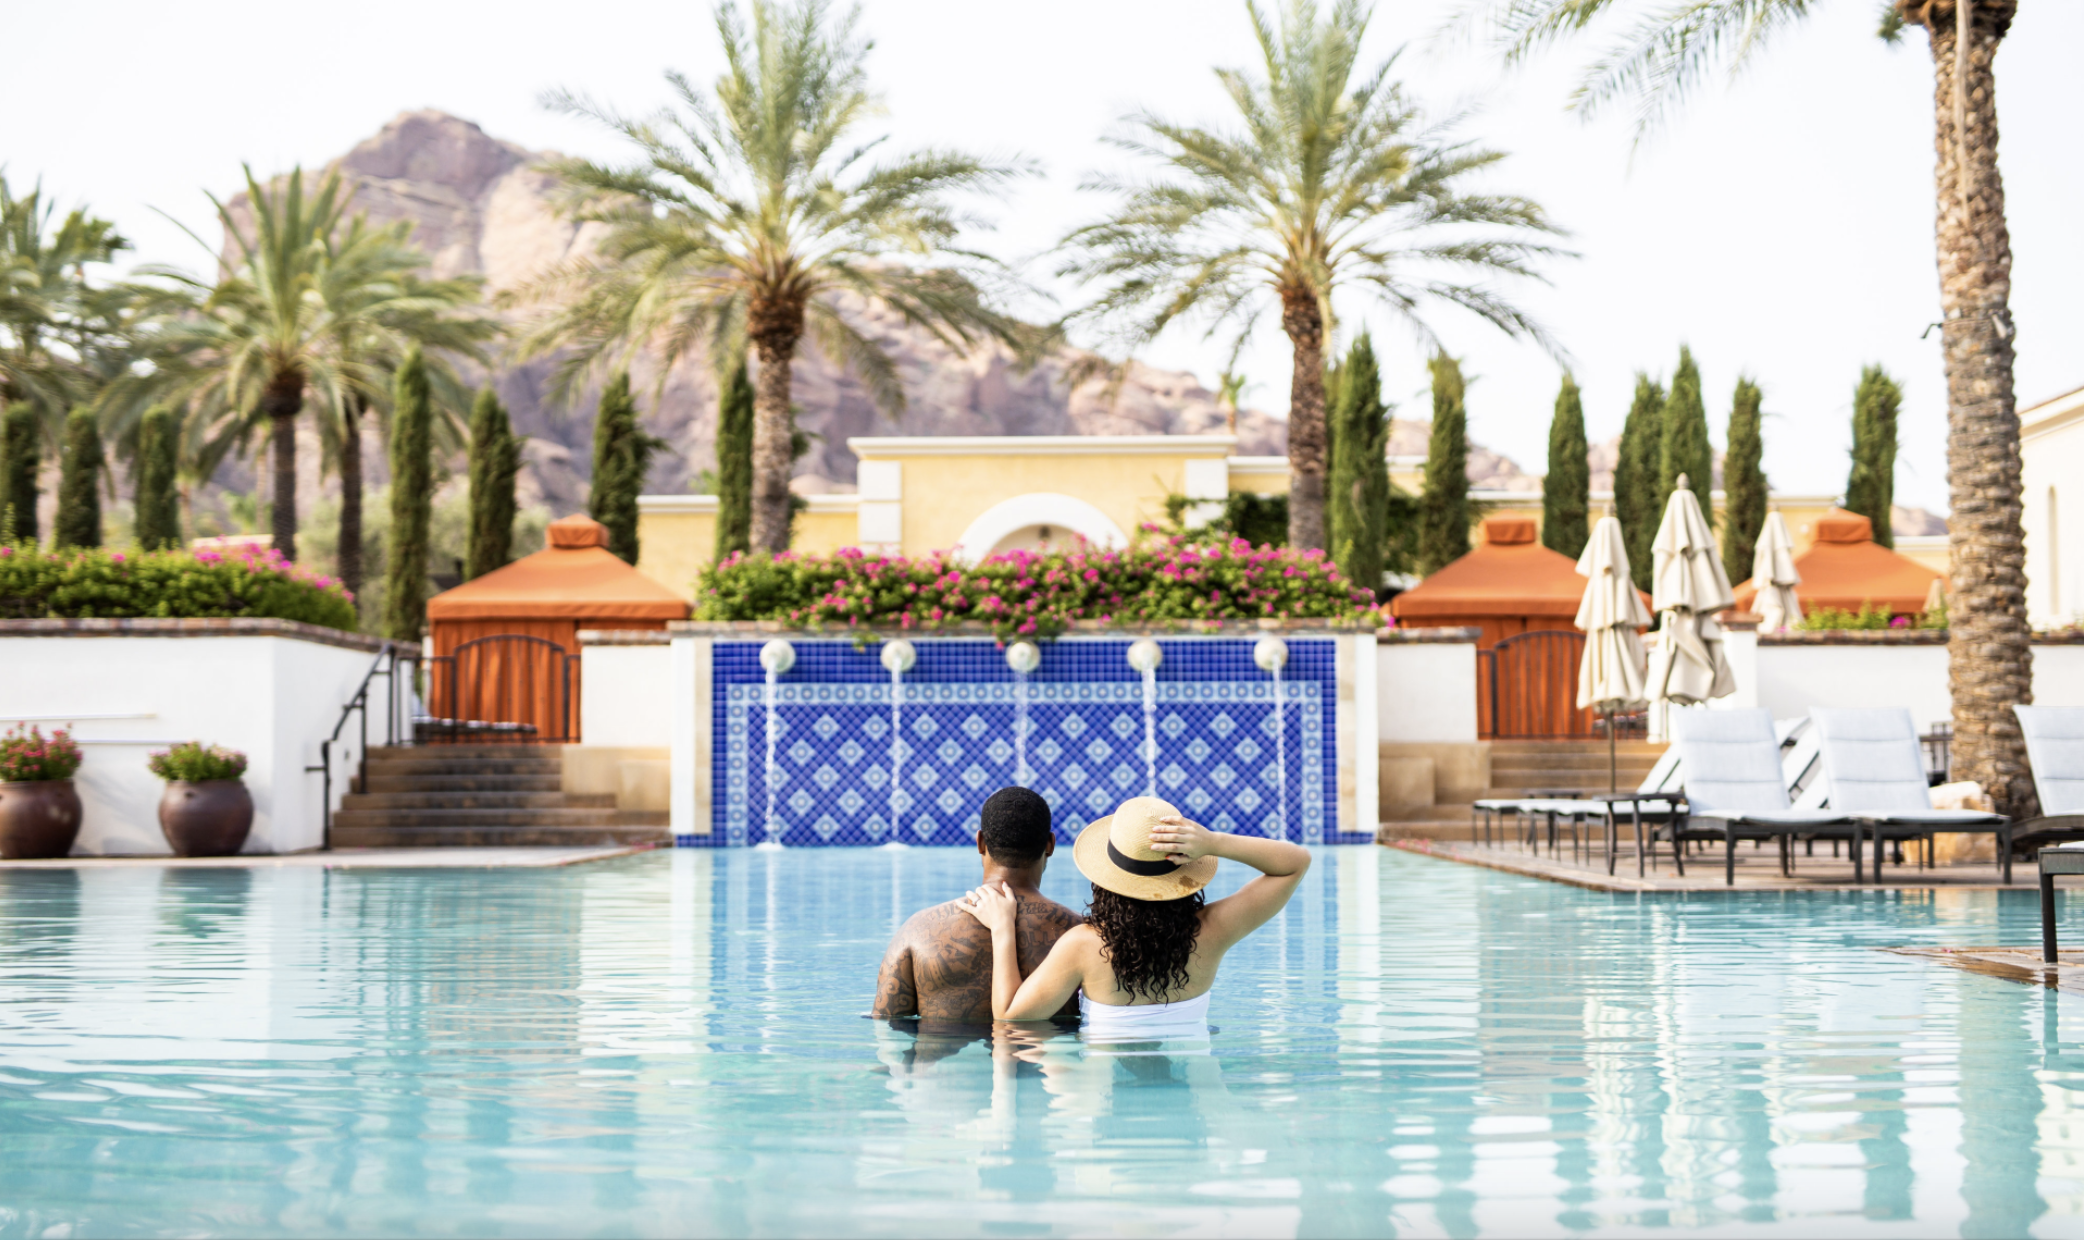 A couple swimming in a pool in Scottsdale, Arizona